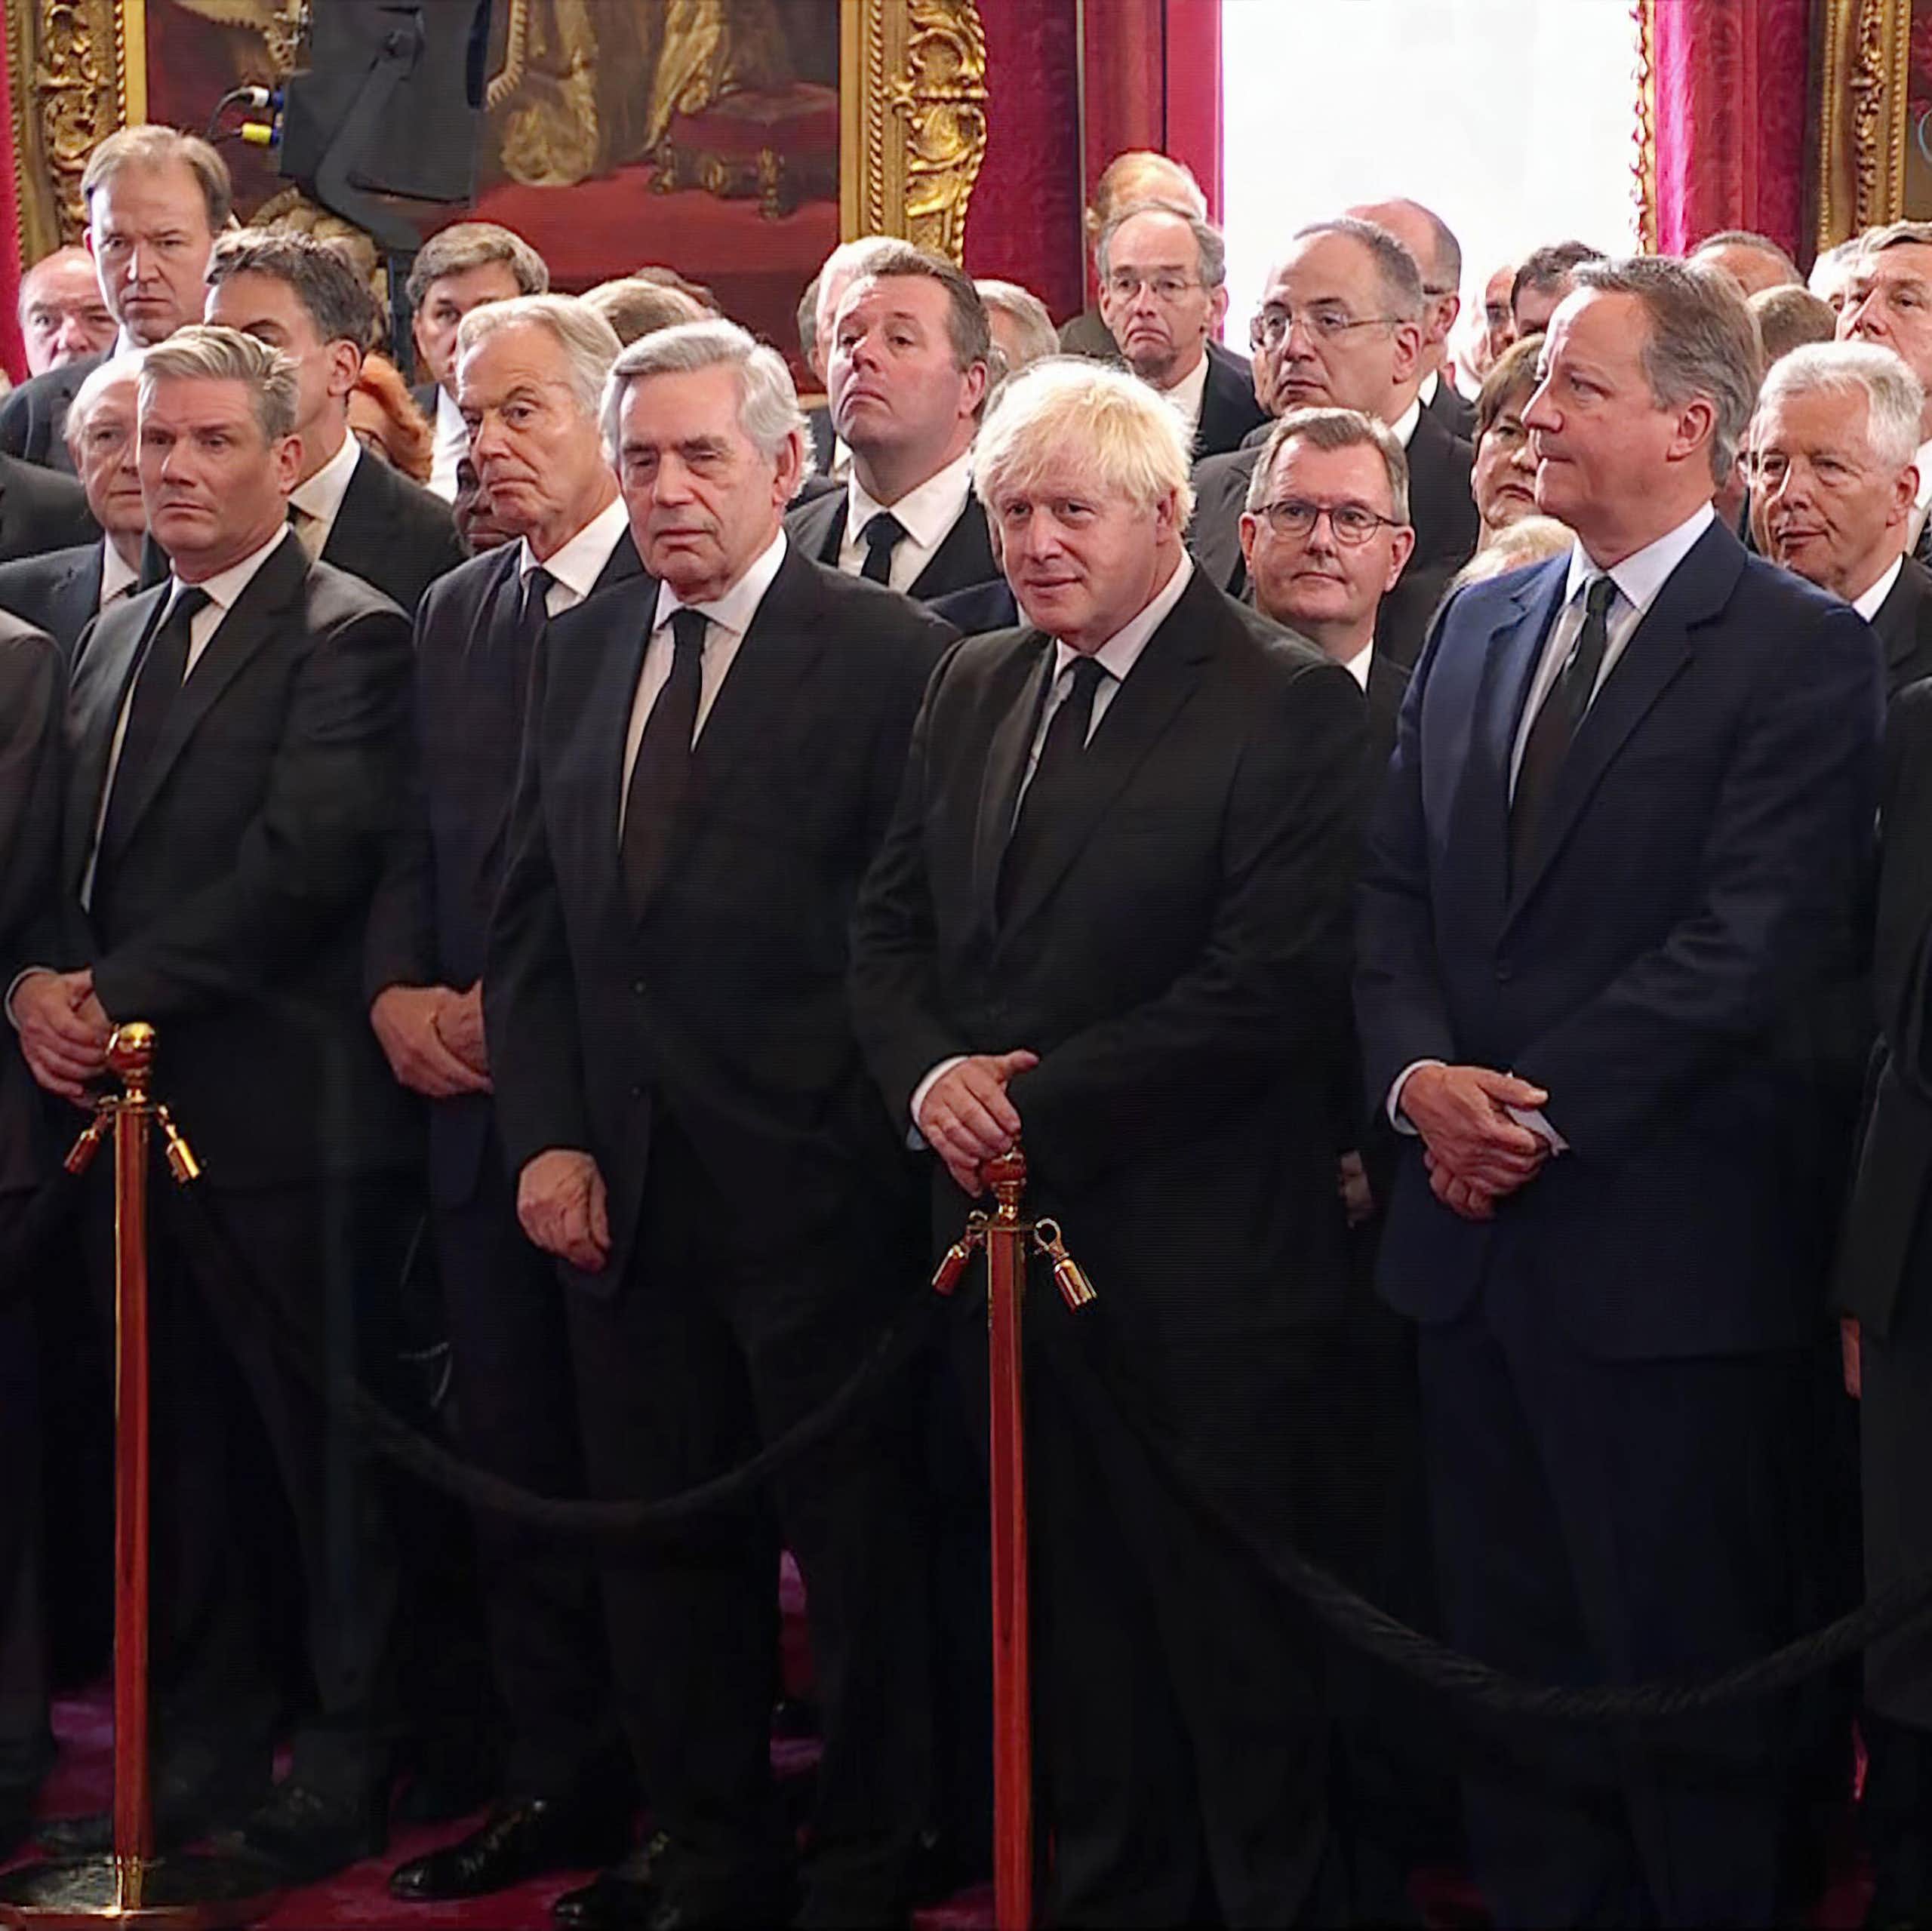 UK politicians standing together in a large group